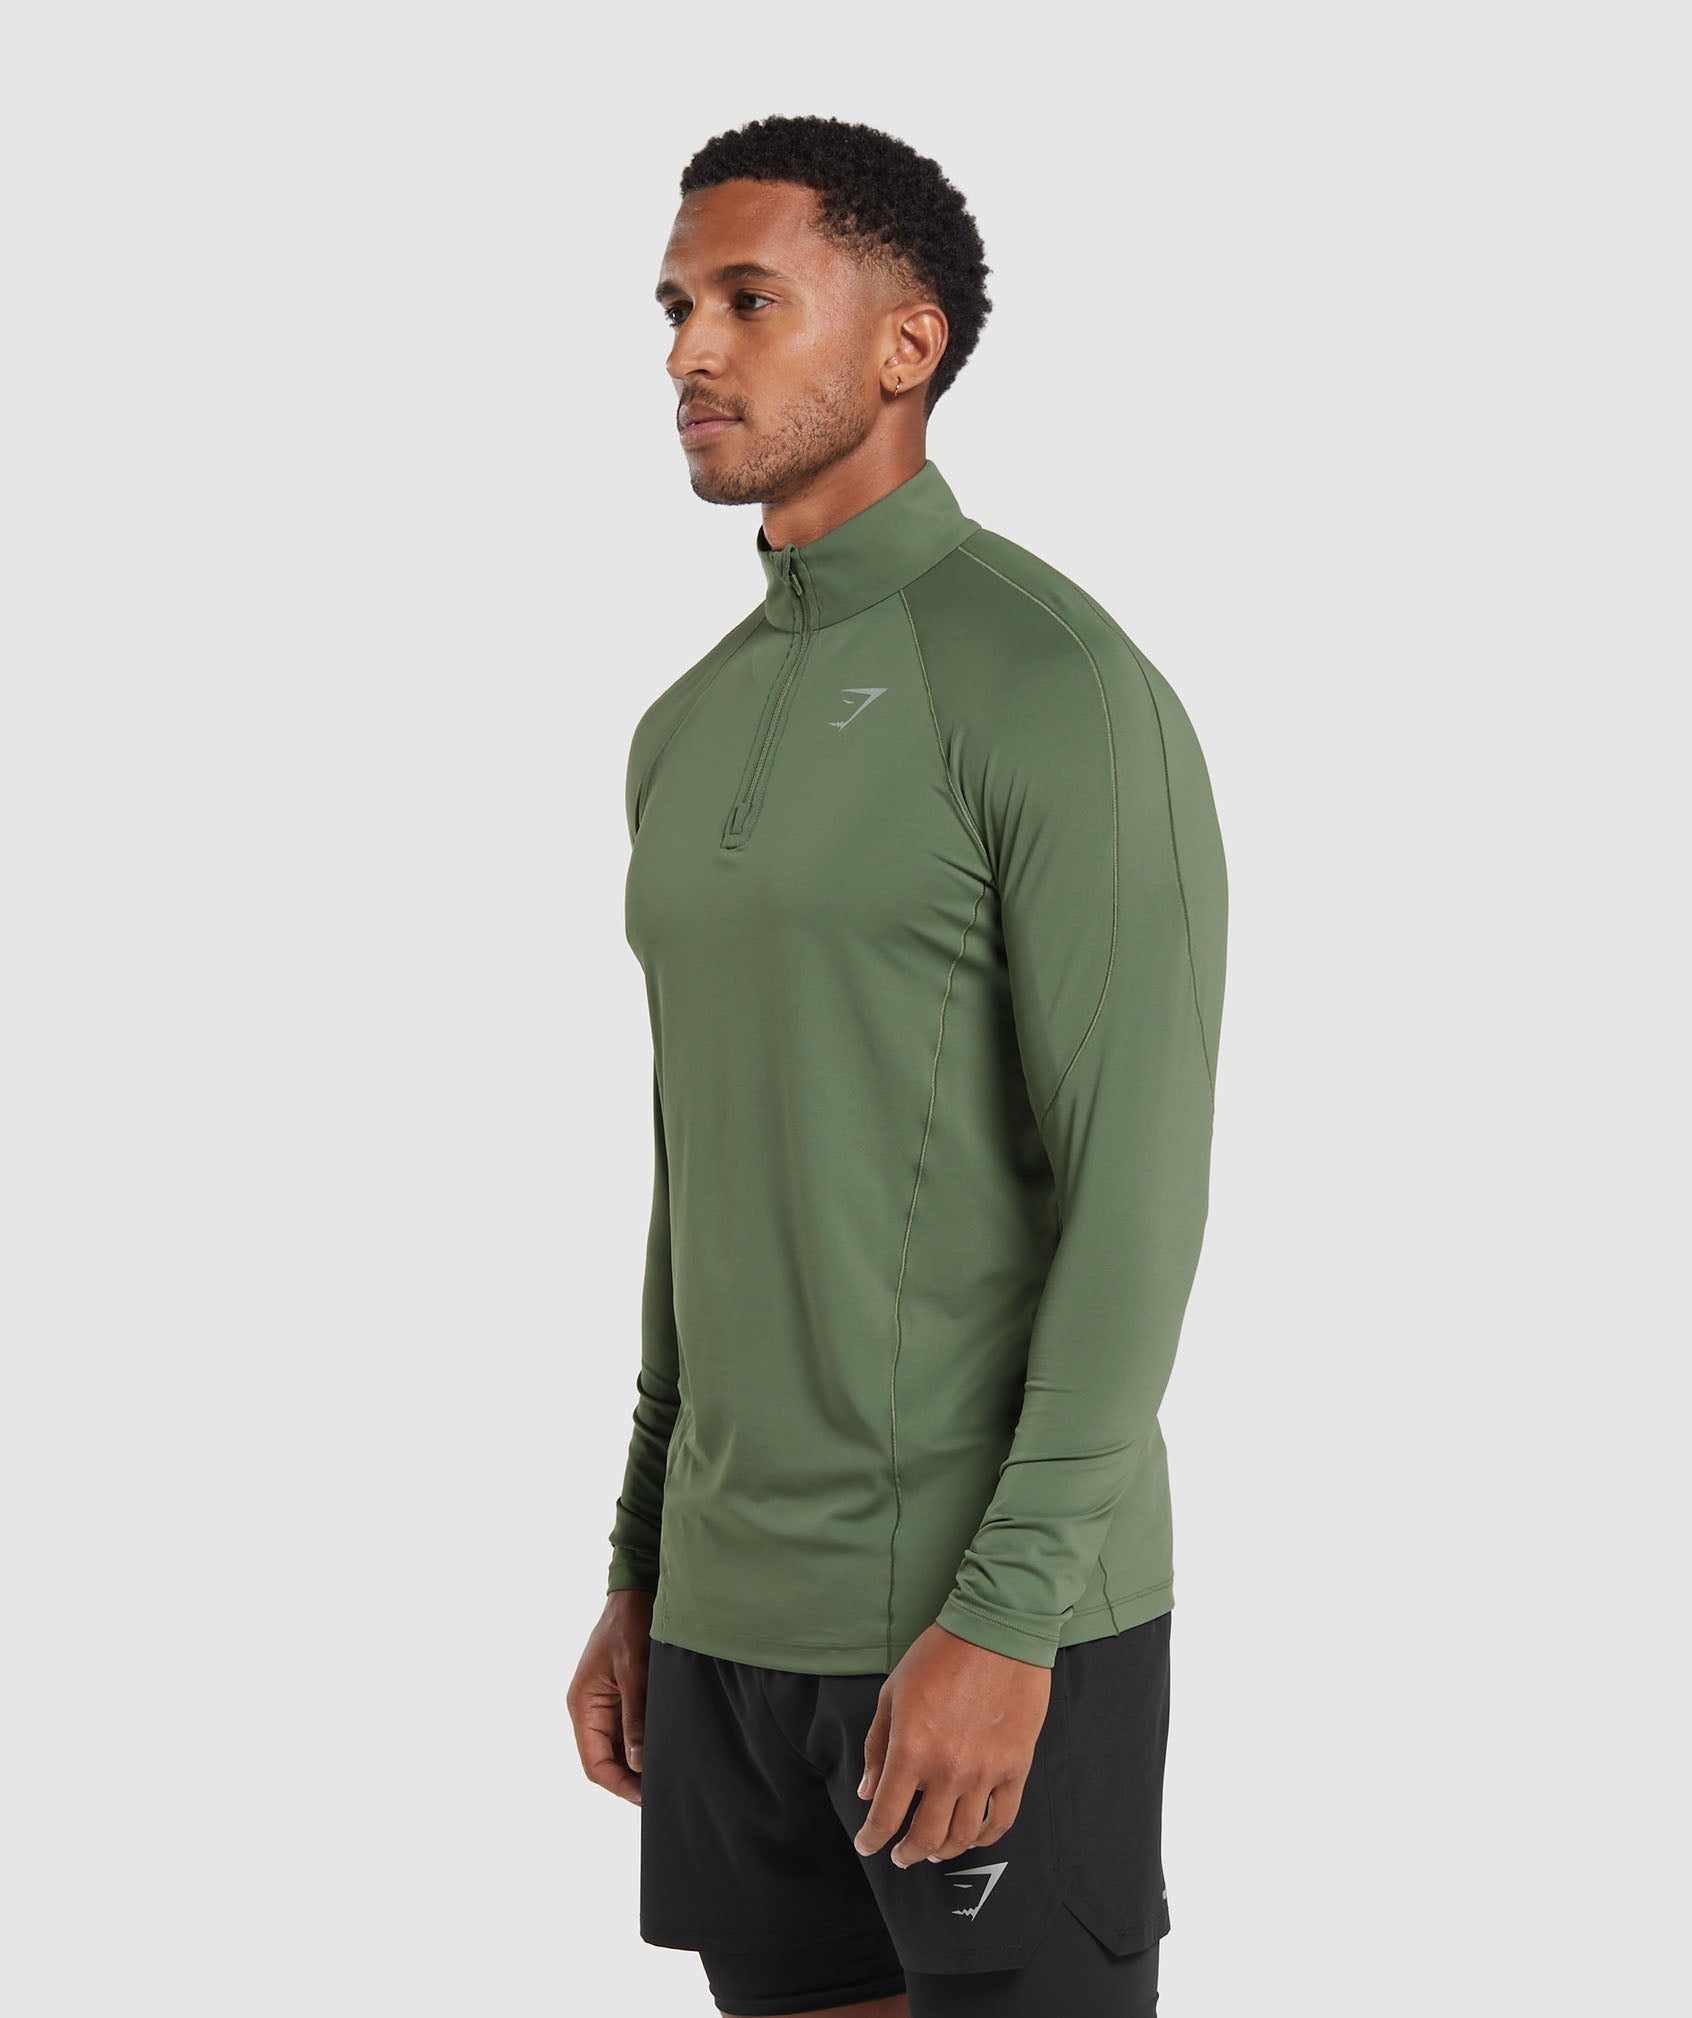 Speed 1/4 Zip in Core Olive - view 4